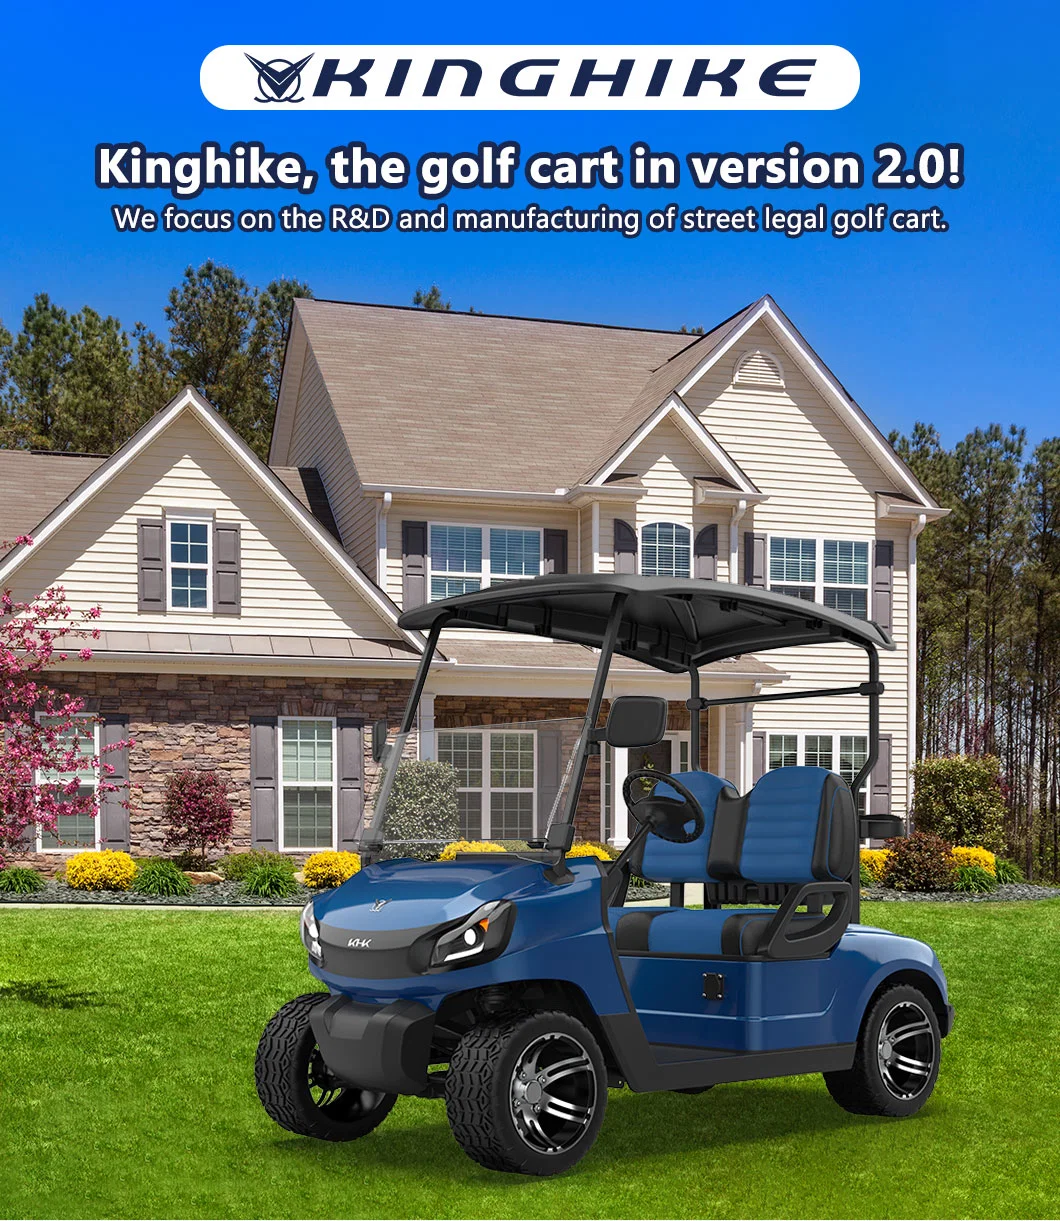 Lifted off Road Personal Lithium Powered Vintage 48 Volt for Sale Fancy Hybrid Hunting Buggy Golf Carts